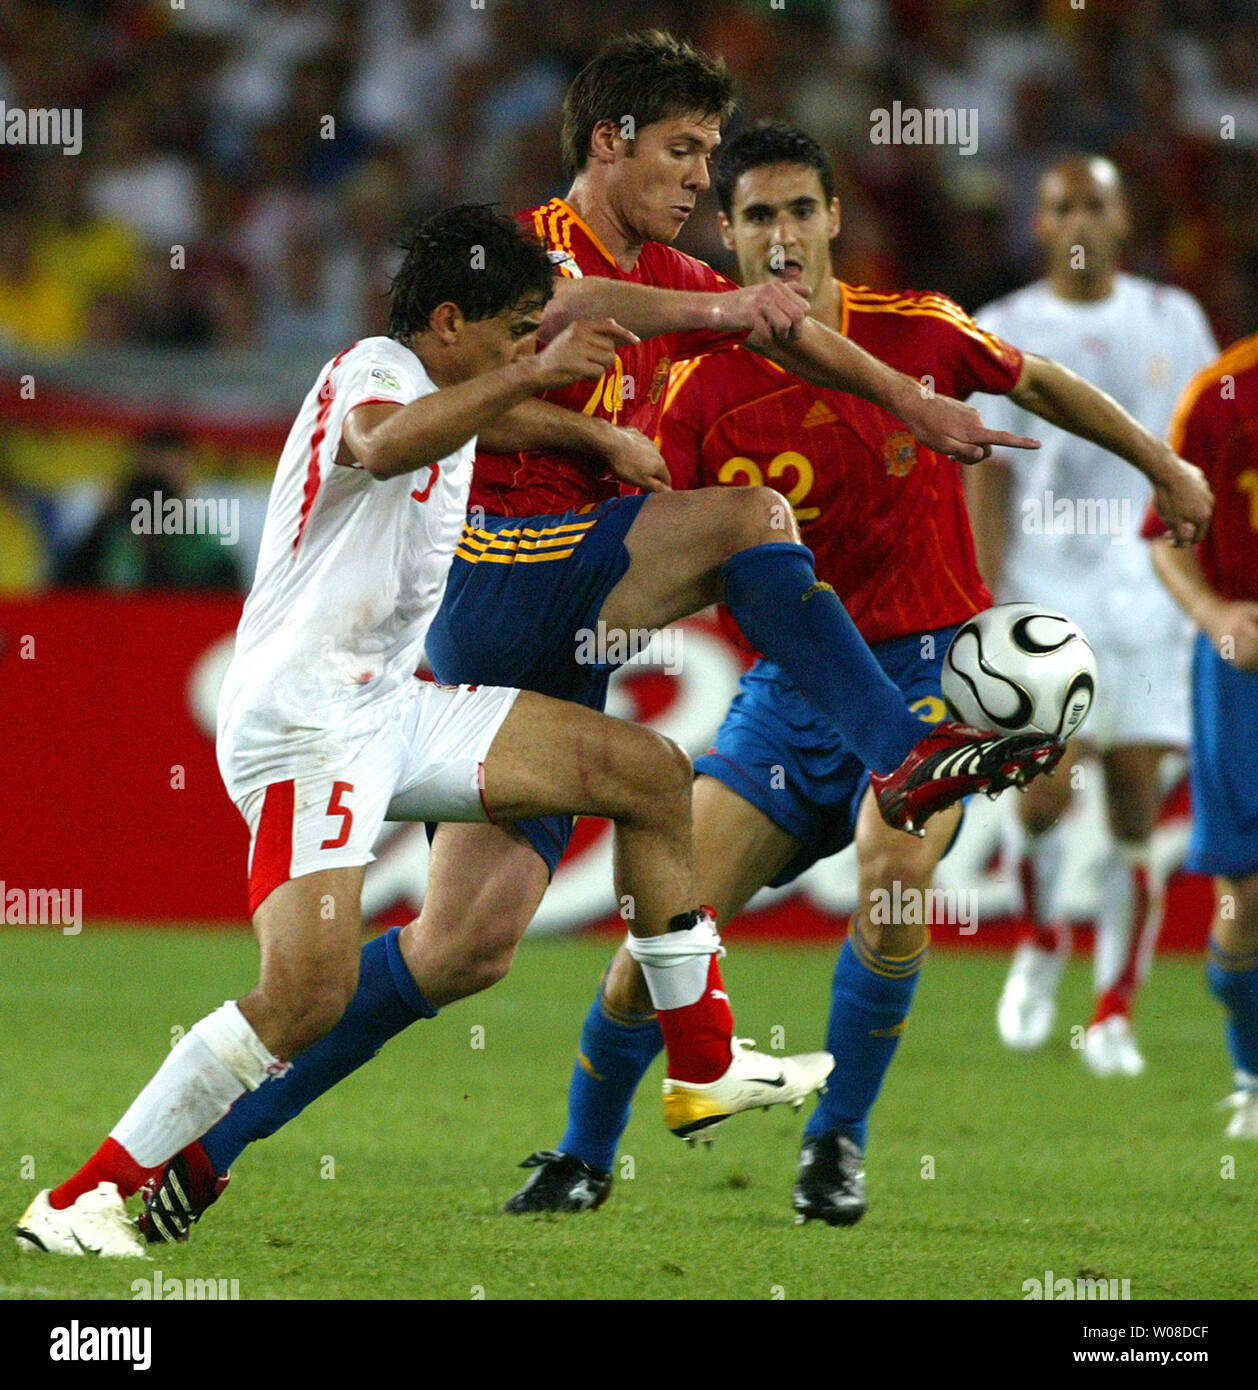 Xabi Alonso (14) from Spain dominates Tunisia's players and resists attacks from Zied Jaziro (5) in World Cup soccer action in Stuttgart, Germany on June 19, 2006. Spain defeated Tunisia 3-1.  (UPI Photo/Arthur Thill) Stock Photo